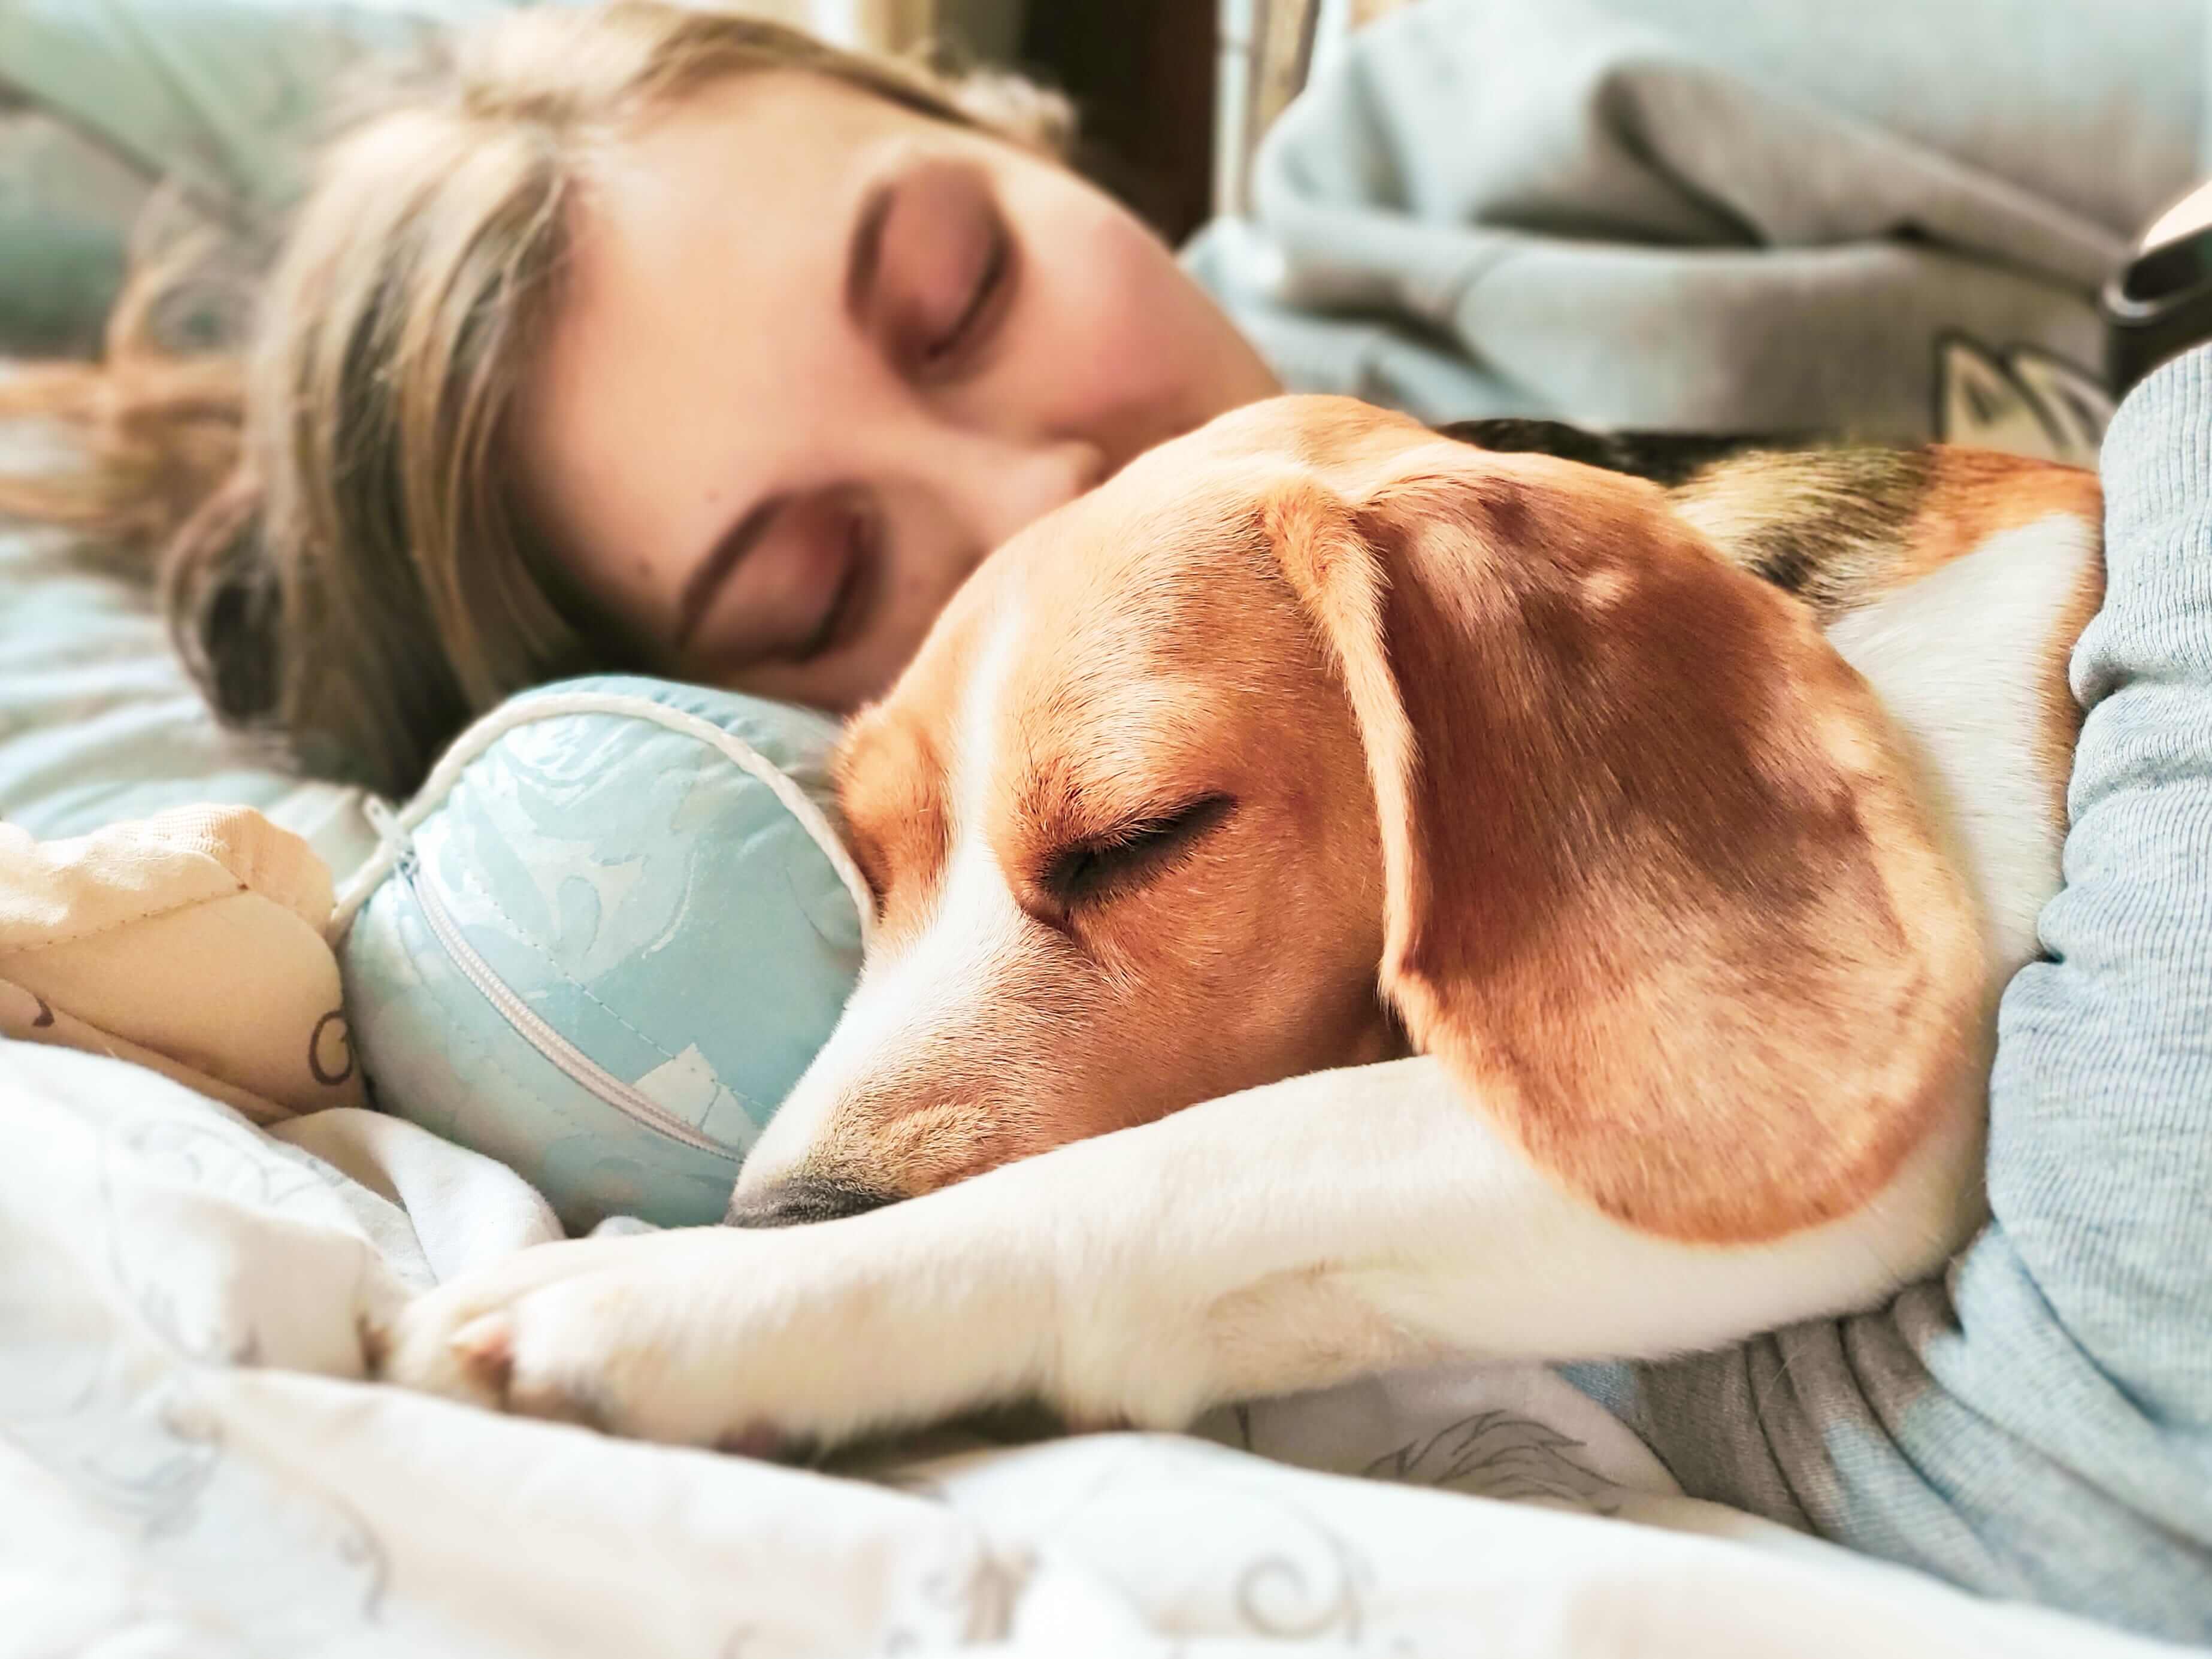 Woman sleeping cuddled up to her dog